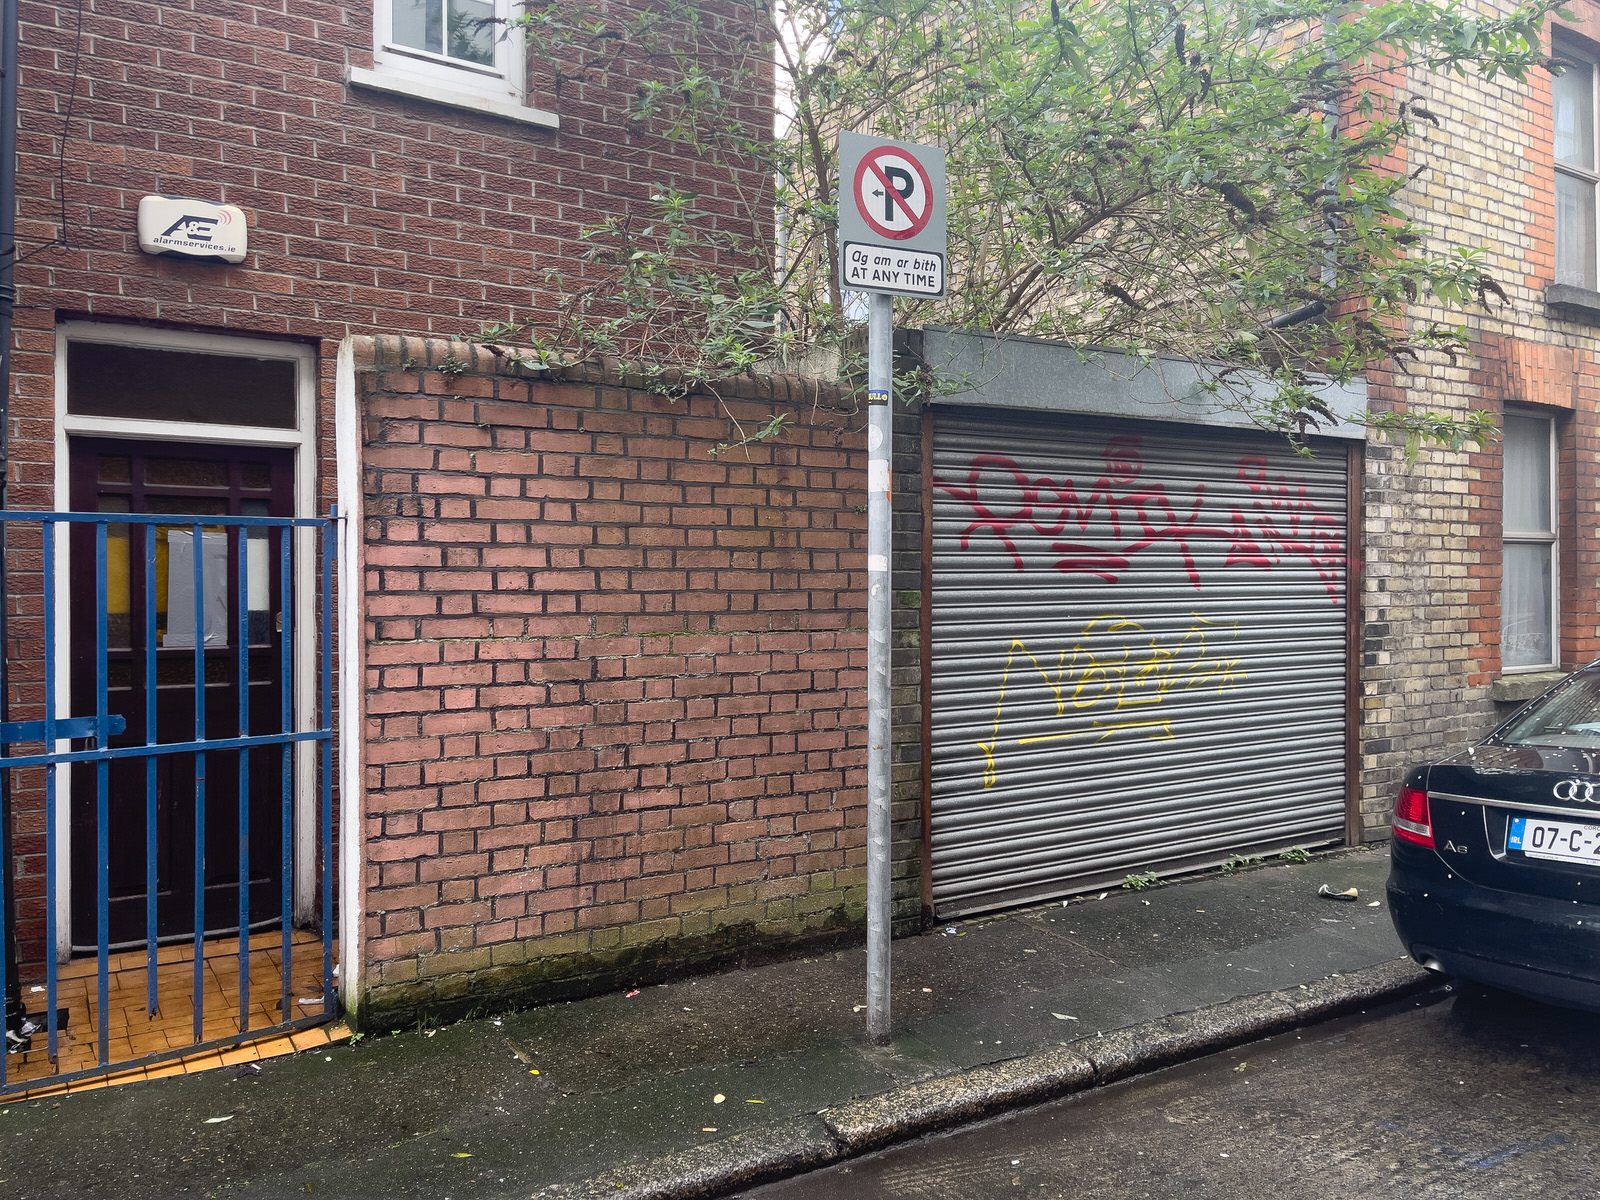 ANOTHER VISIT TO COKE LANE [SMITHFIELD AREA OF DUBLIN]-228142-1